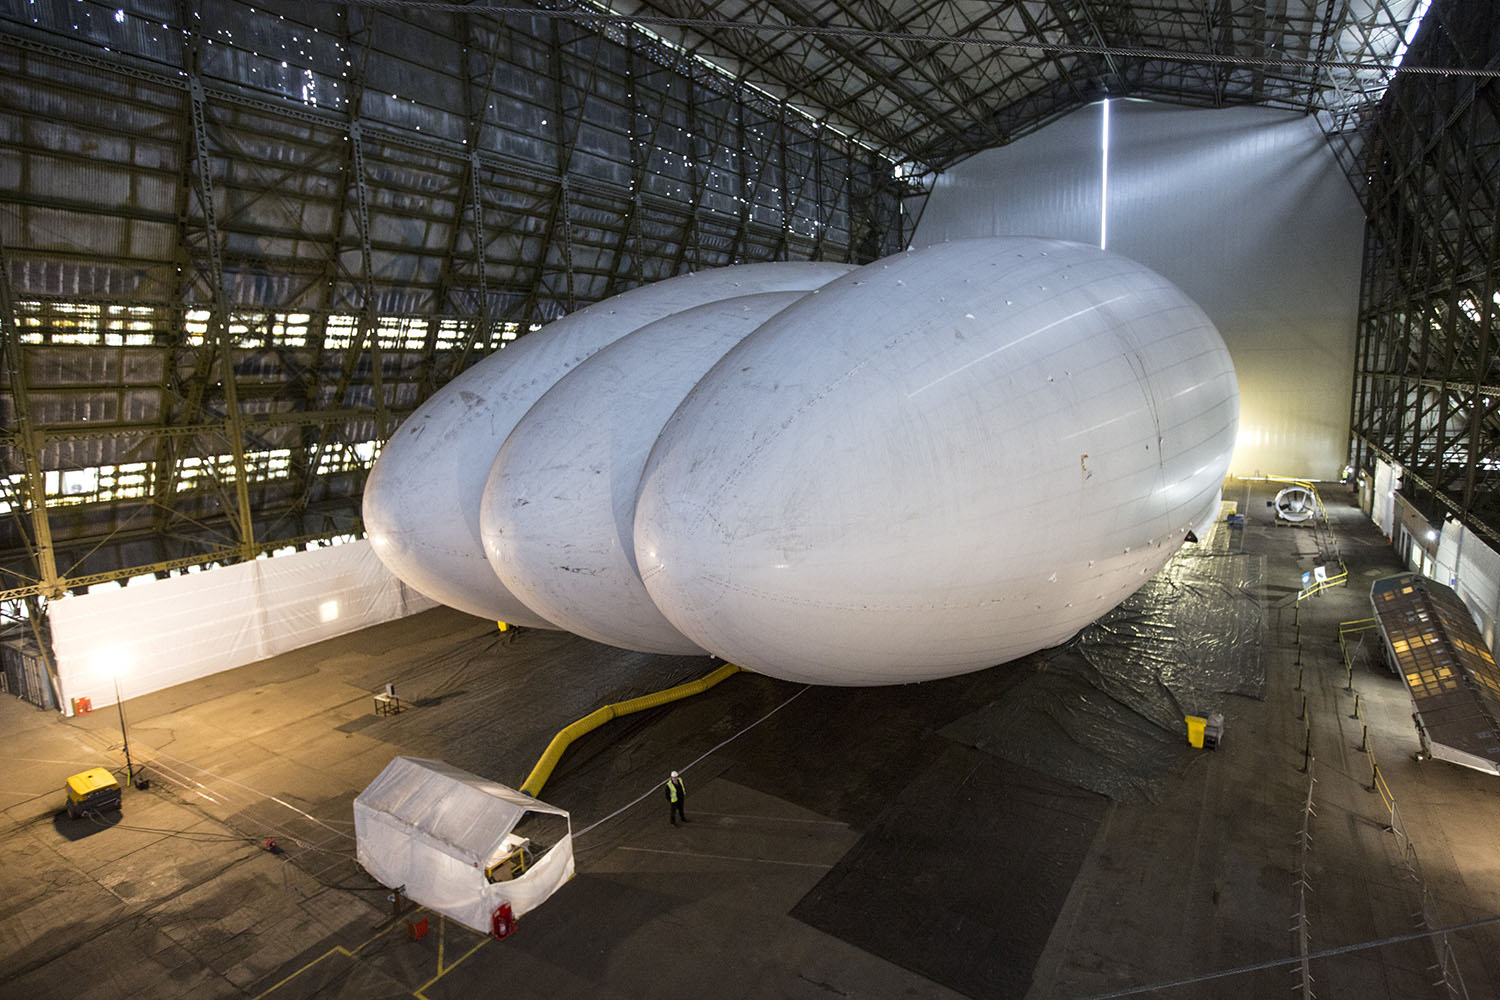 Feb. 28, 2014. The helium-filled 'Airlander'  is the world's longest aircraft at 92 meters. It was originally developed for the US military before the project was cancelled due to budget cuts.